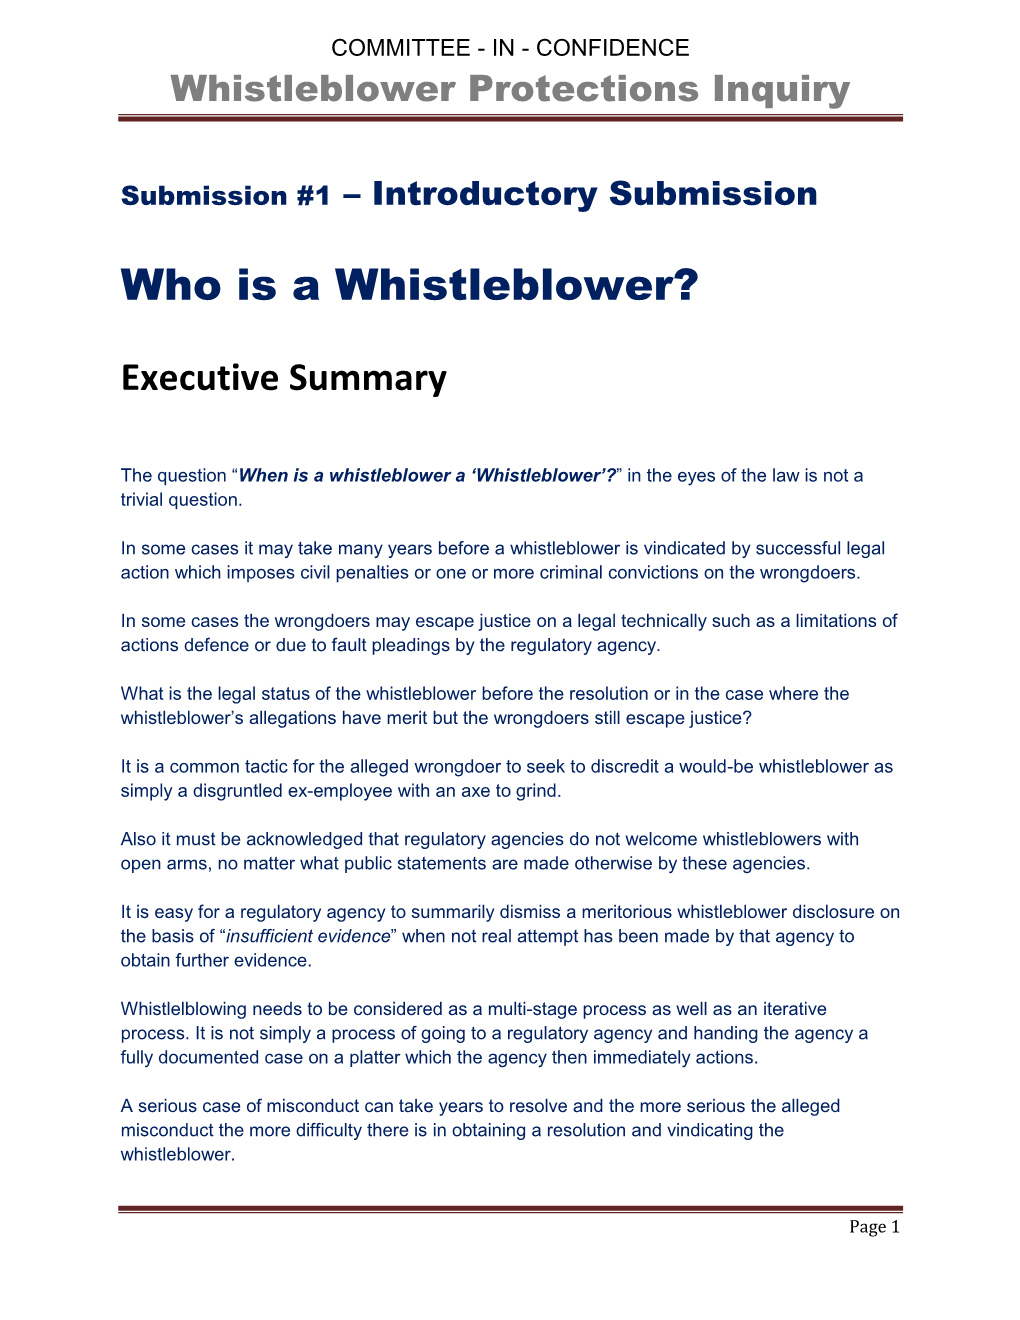 Whistleblower Protections Inquiry